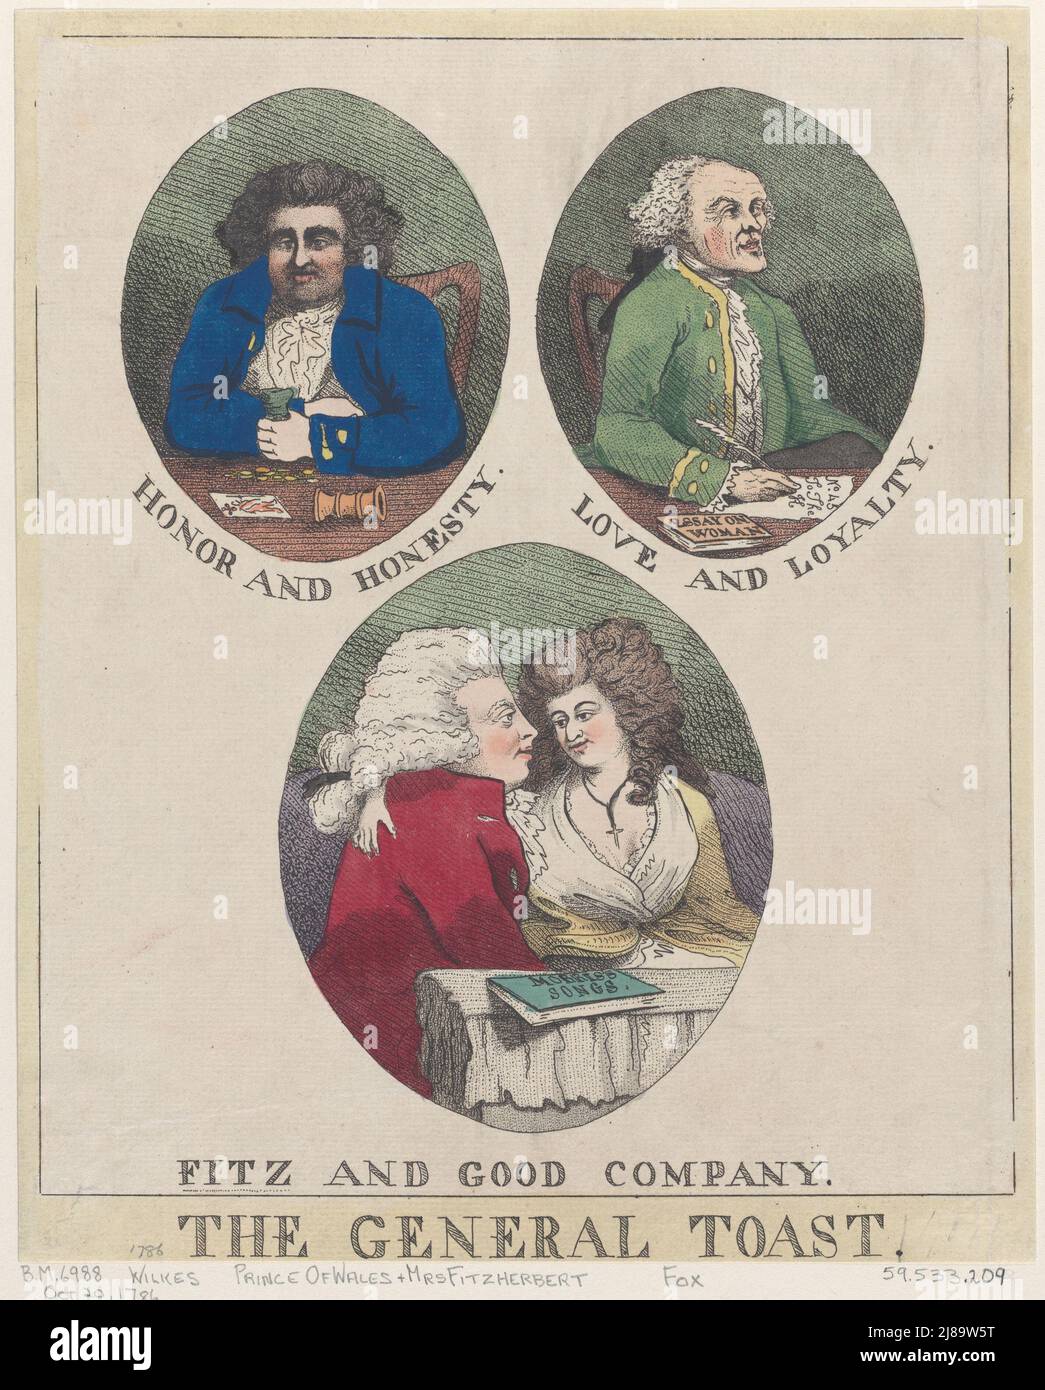 The General Toast: Honor and Honesty, Love and Loyalty, Fitz and Good Company, October 20, 1786. Stock Photo